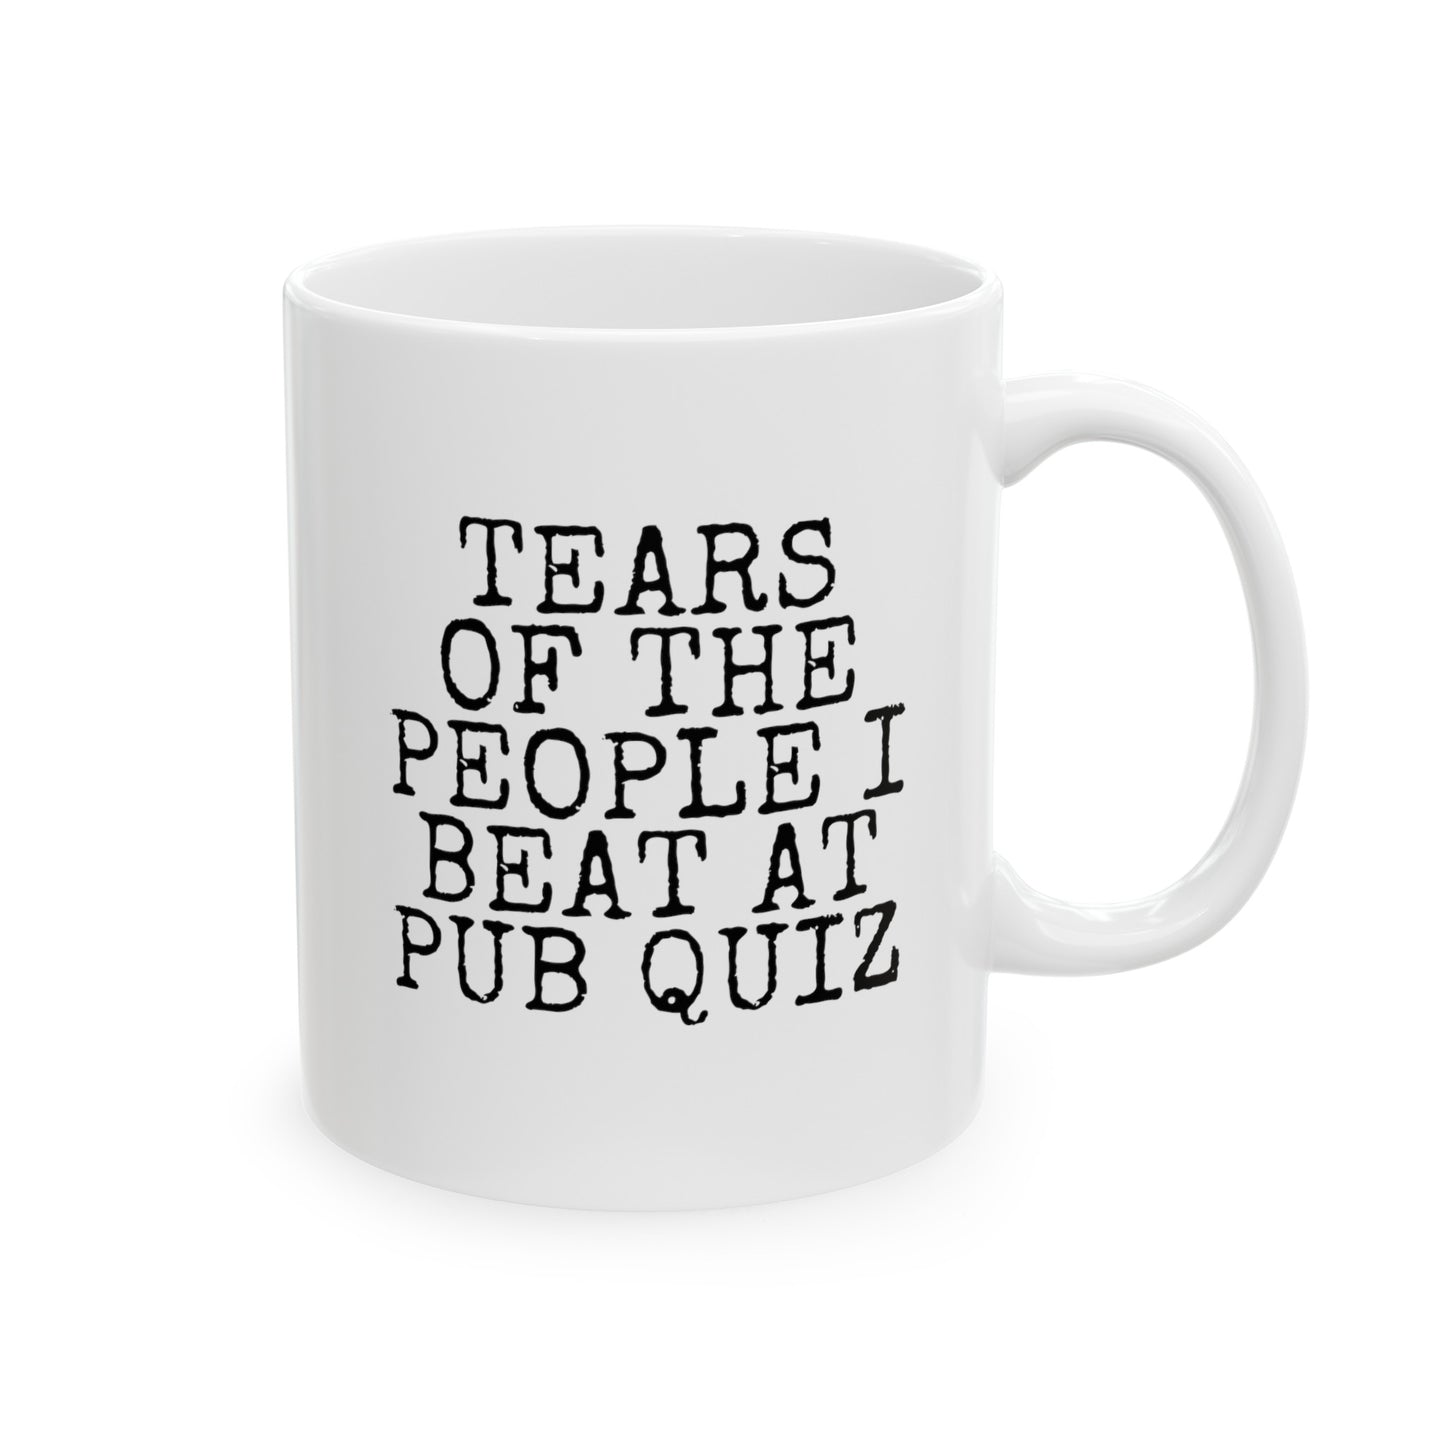 Tears Of The People I Beat At Pub Quiz 11oz white funny large coffee mug gift for British UK mate bar games night friends him her waveywares wavey wares wavywares wavy wares